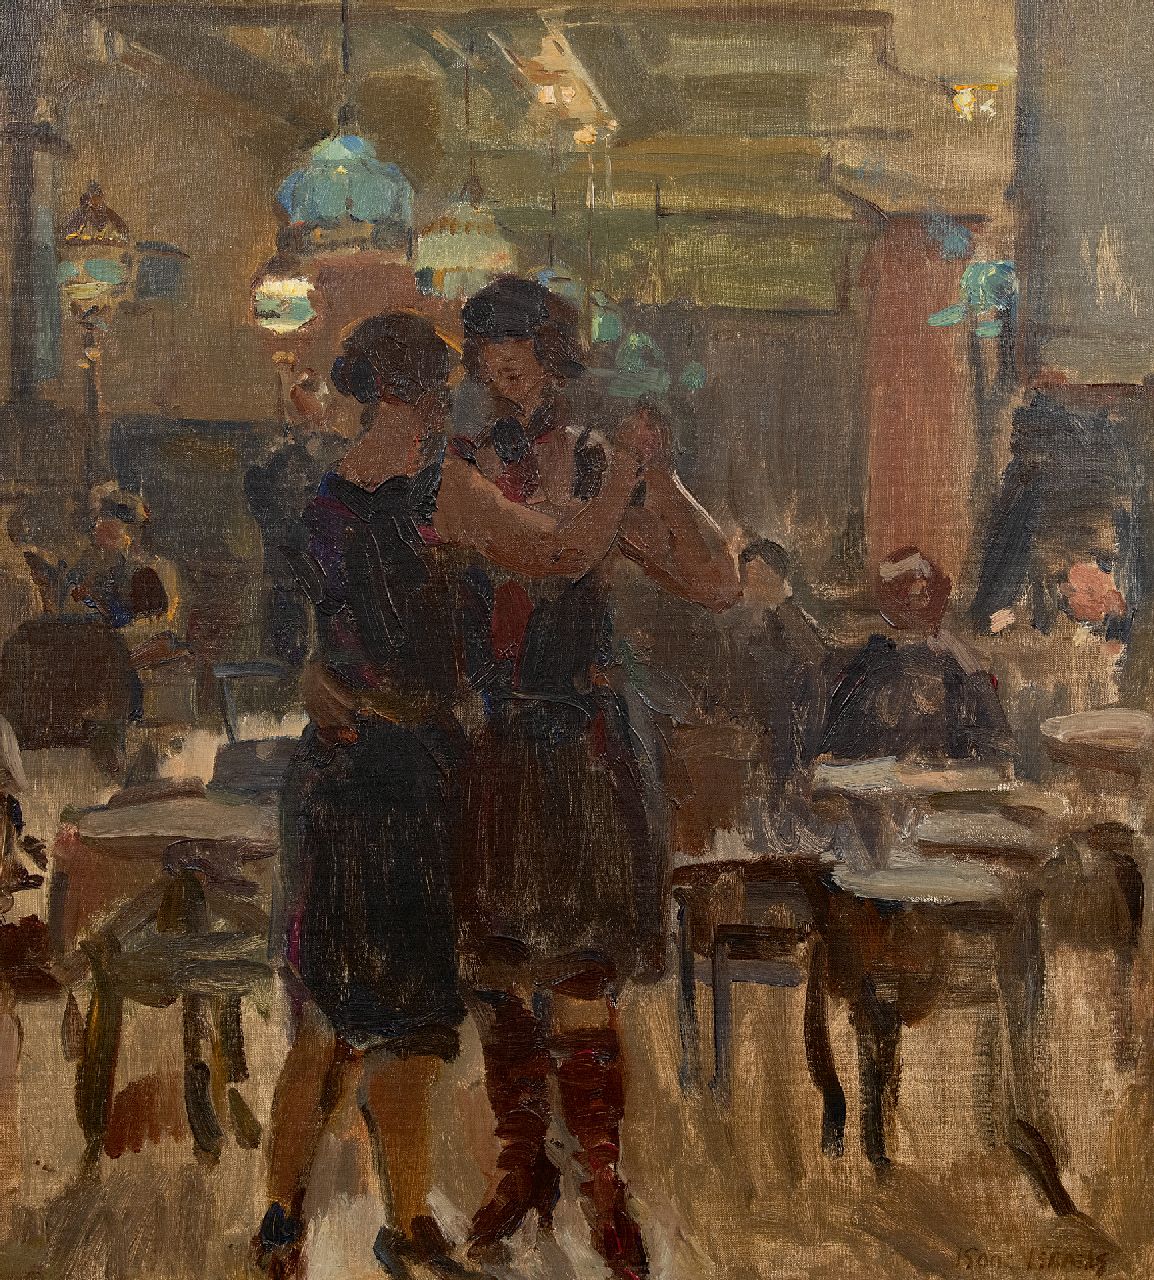 Israels I.L.  | 'Isaac' Lazarus Israels, The café Scala, The Hague, oil on canvas 65.0 x 58.0 cm, signed l.r. and painted between 1927-1934